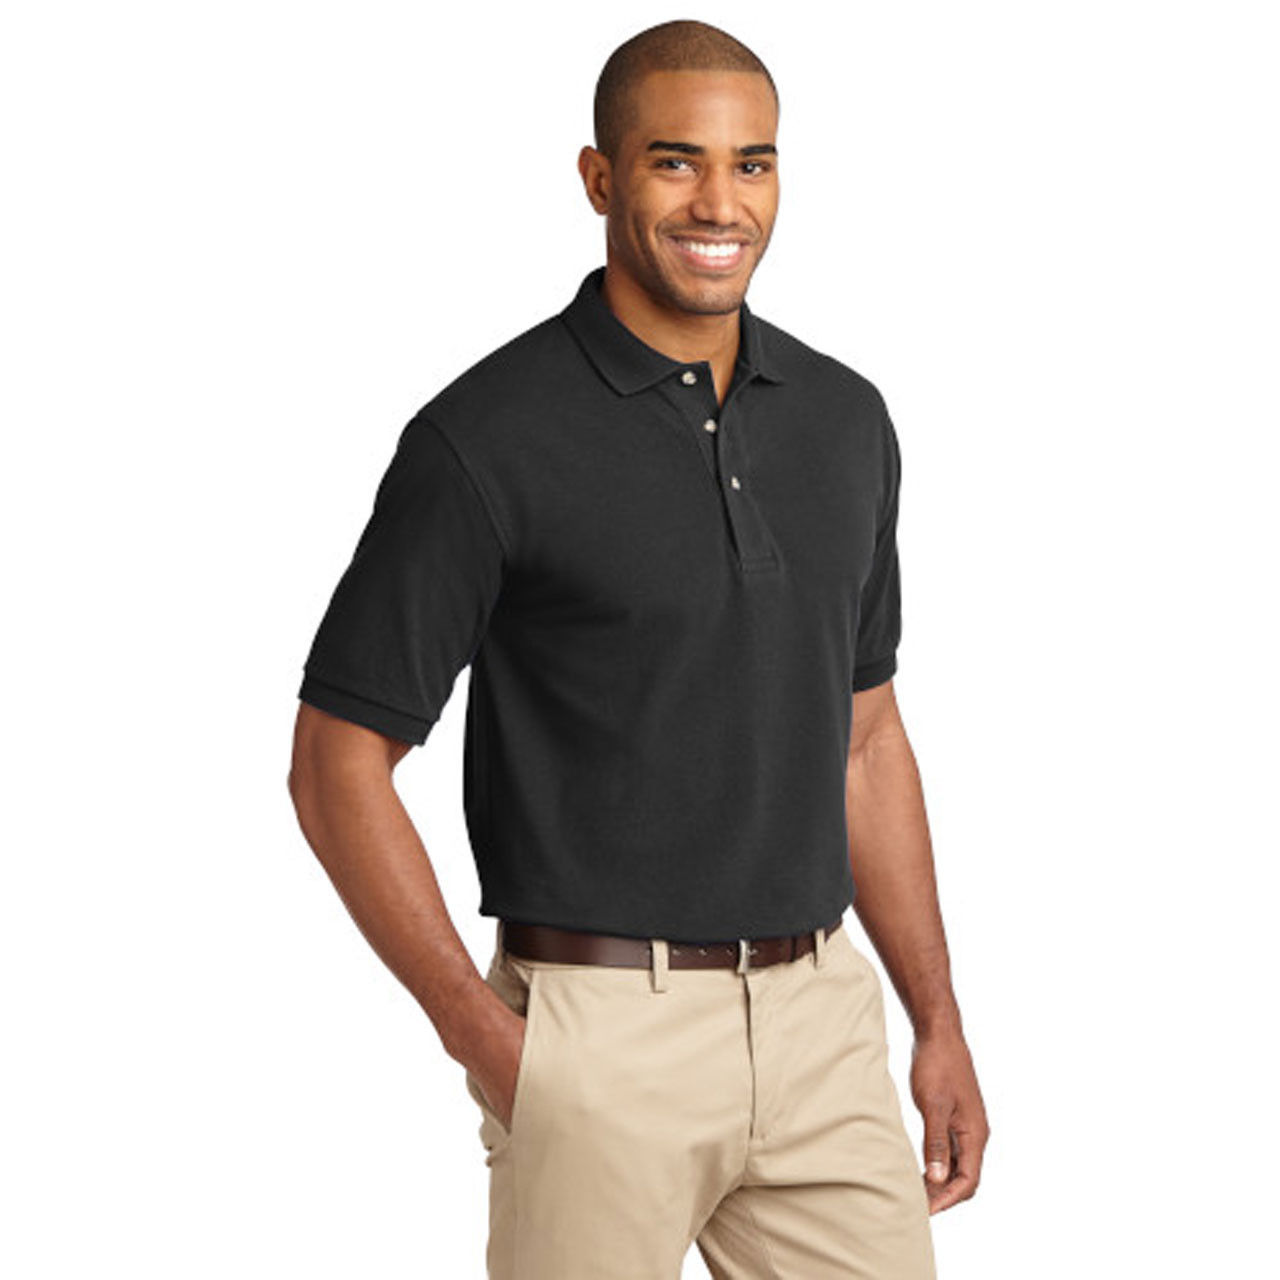 Wholesale Heavyweight Cotton Pique Polo Shirt - Black K420, Case of 36 Questions & Answers